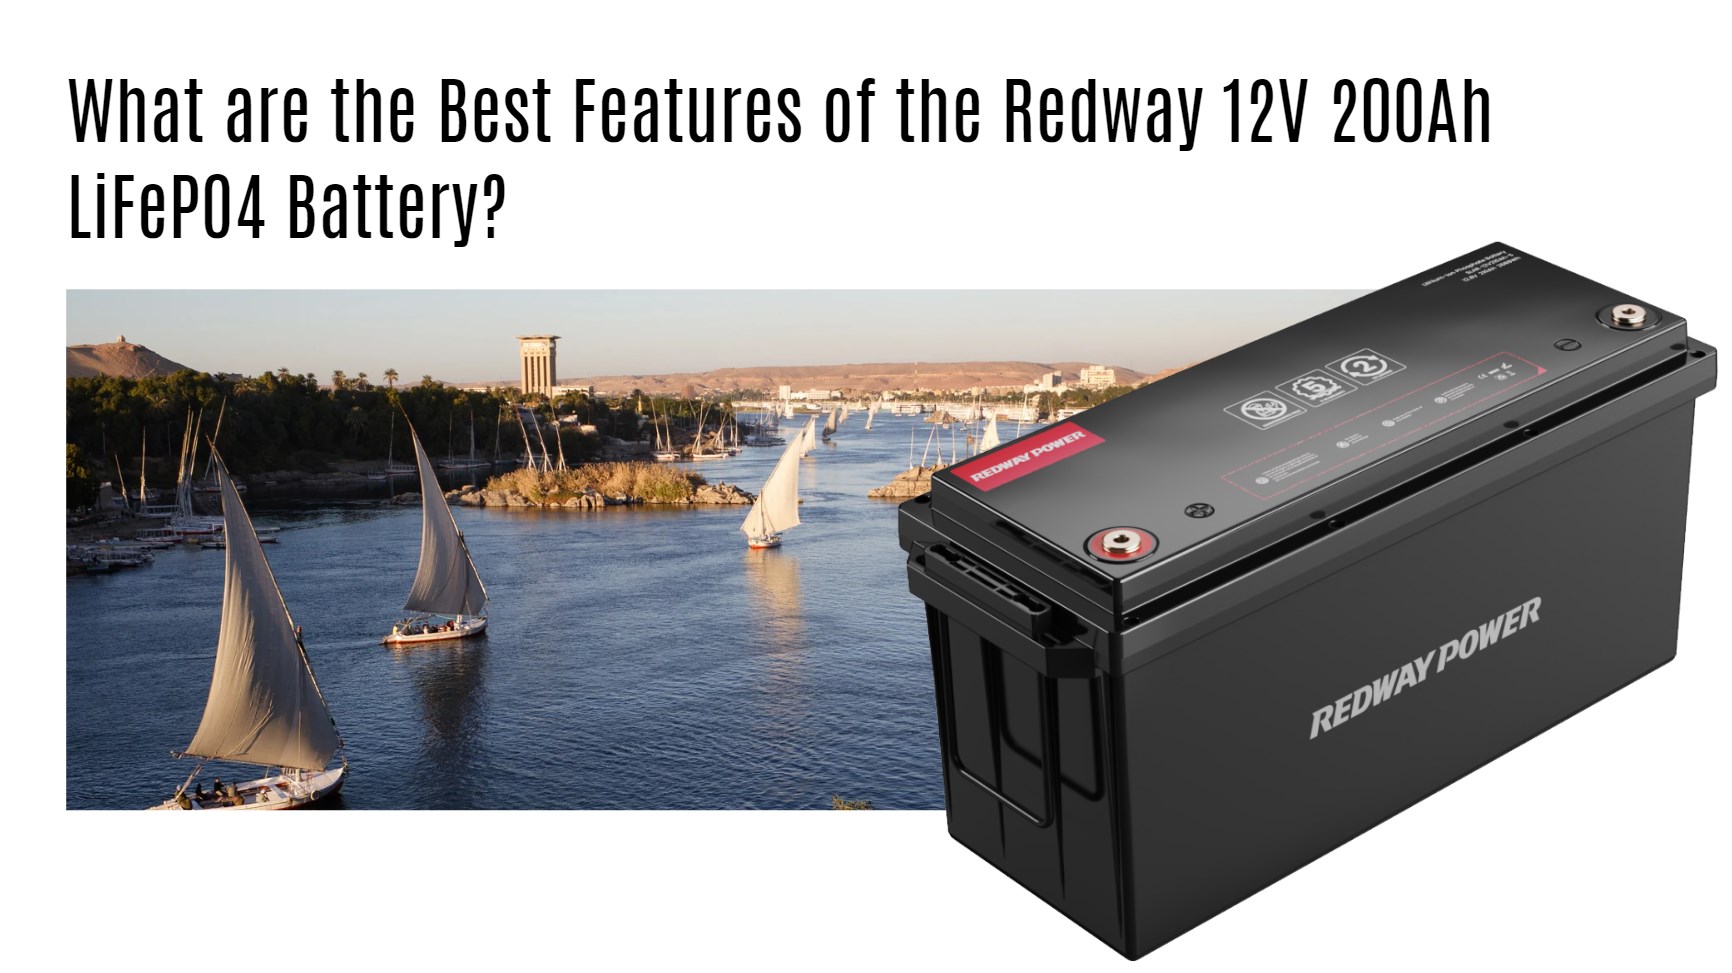 What are the Best Features of the Redway 12V 200Ah LiFePO4 Battery?